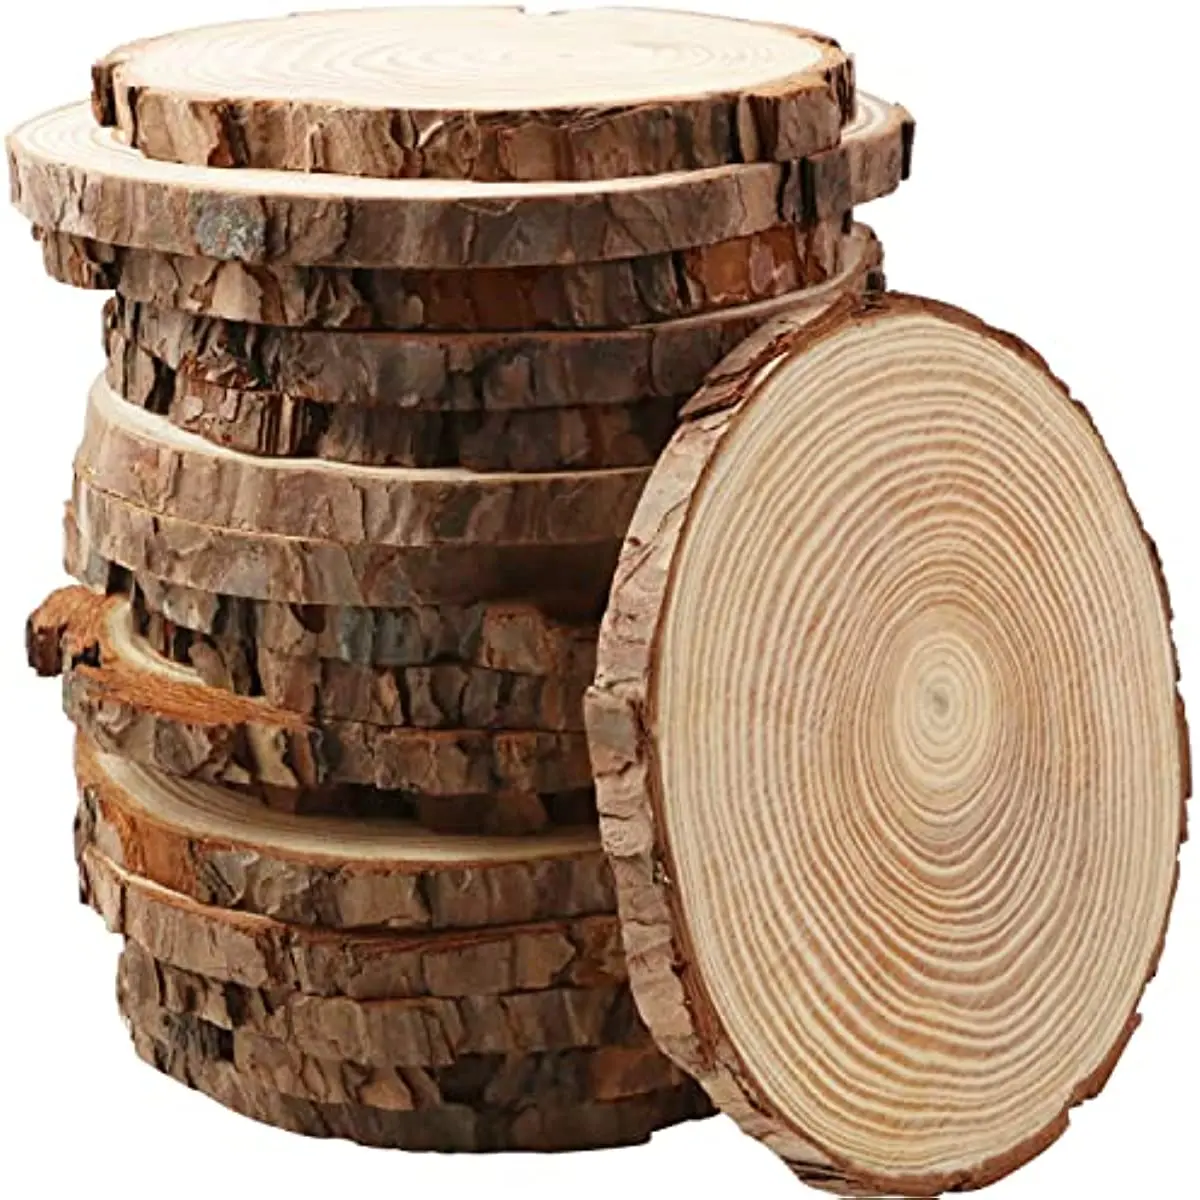 

Unfinished Wood Circles Natural Round Wood Discs with Tree Bark Circles Crafts Wood Slices Centerpieces for Rustic Wedding Decor